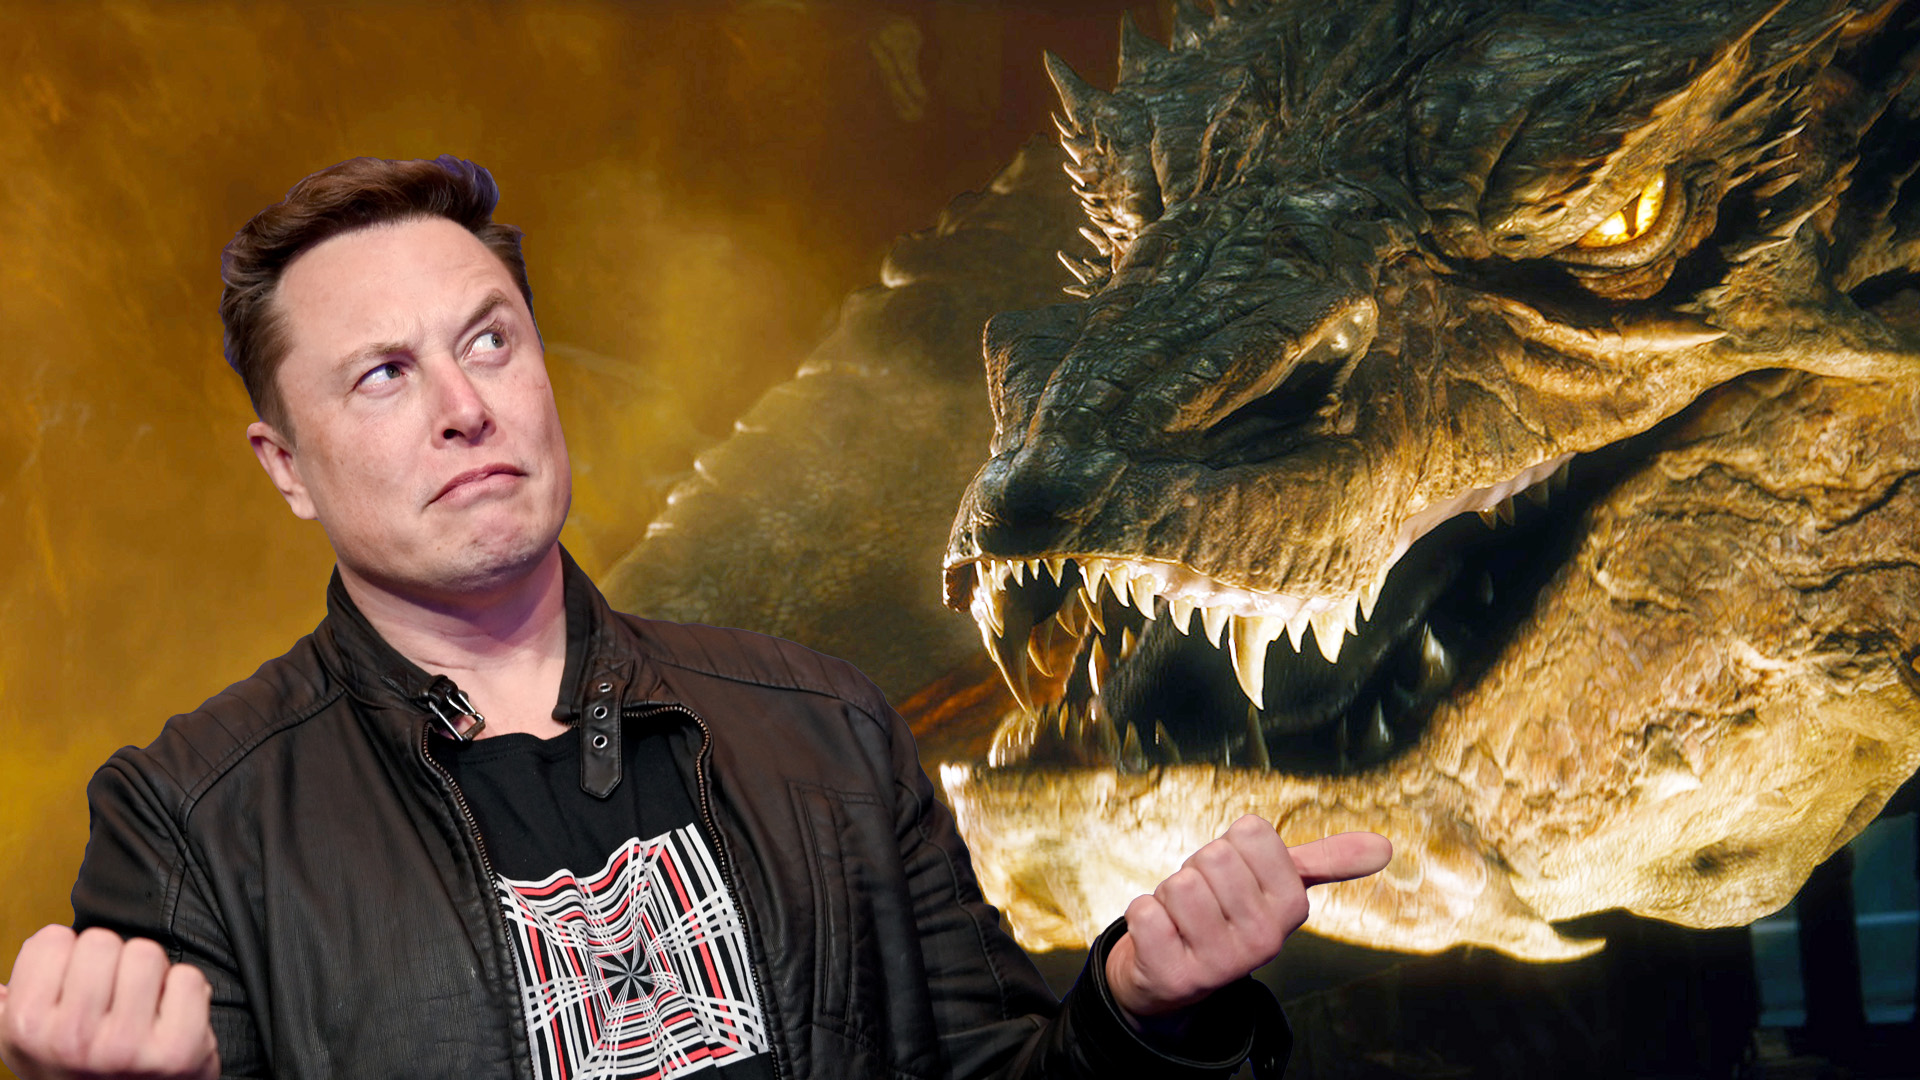 Smaug is the Richest LotR Character (Still Nowhere Near Elon Musk, Though)